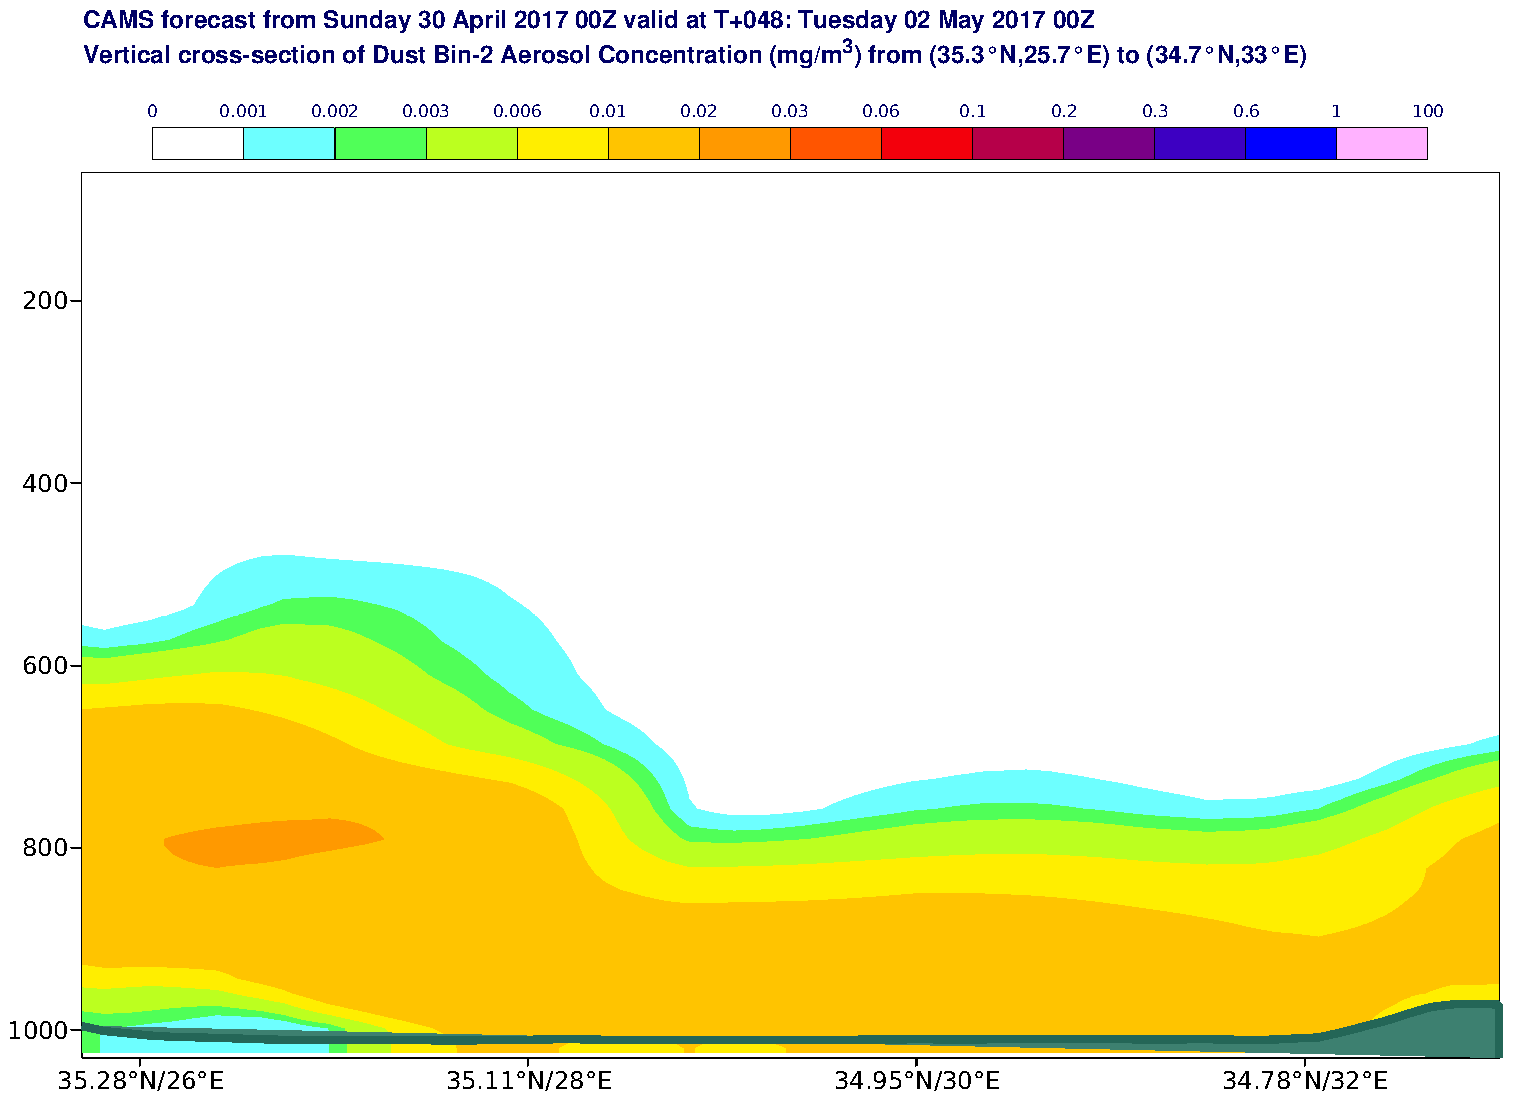 Vertical cross-section of Dust Bin-2 Aerosol Concentration (mg/m3) valid at T48 - 2017-05-02 00:00